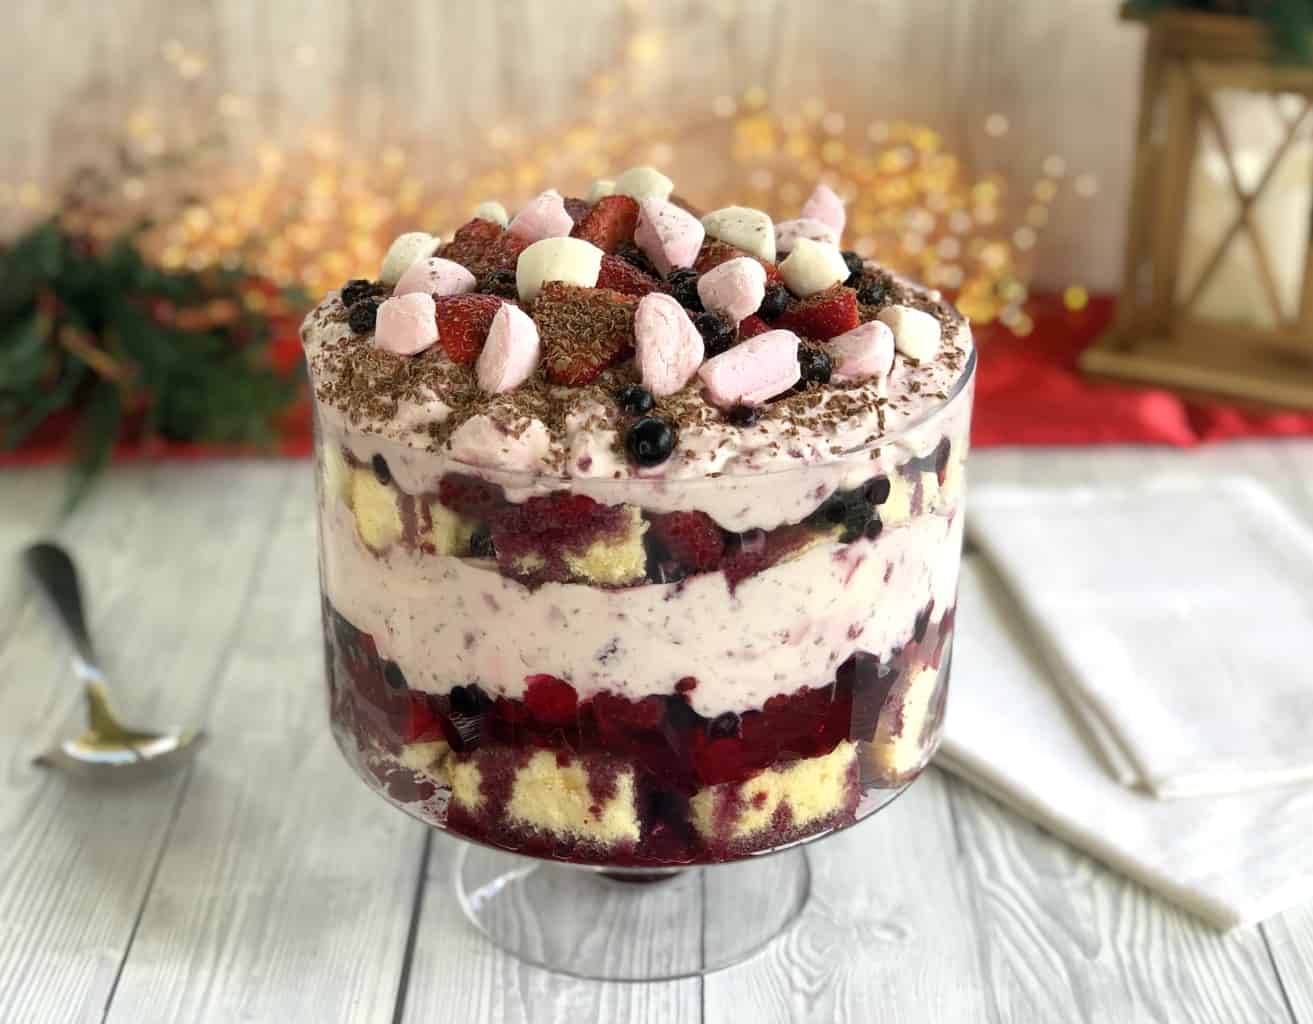 Bowl of Ambrosia Trifle, with festive decorations